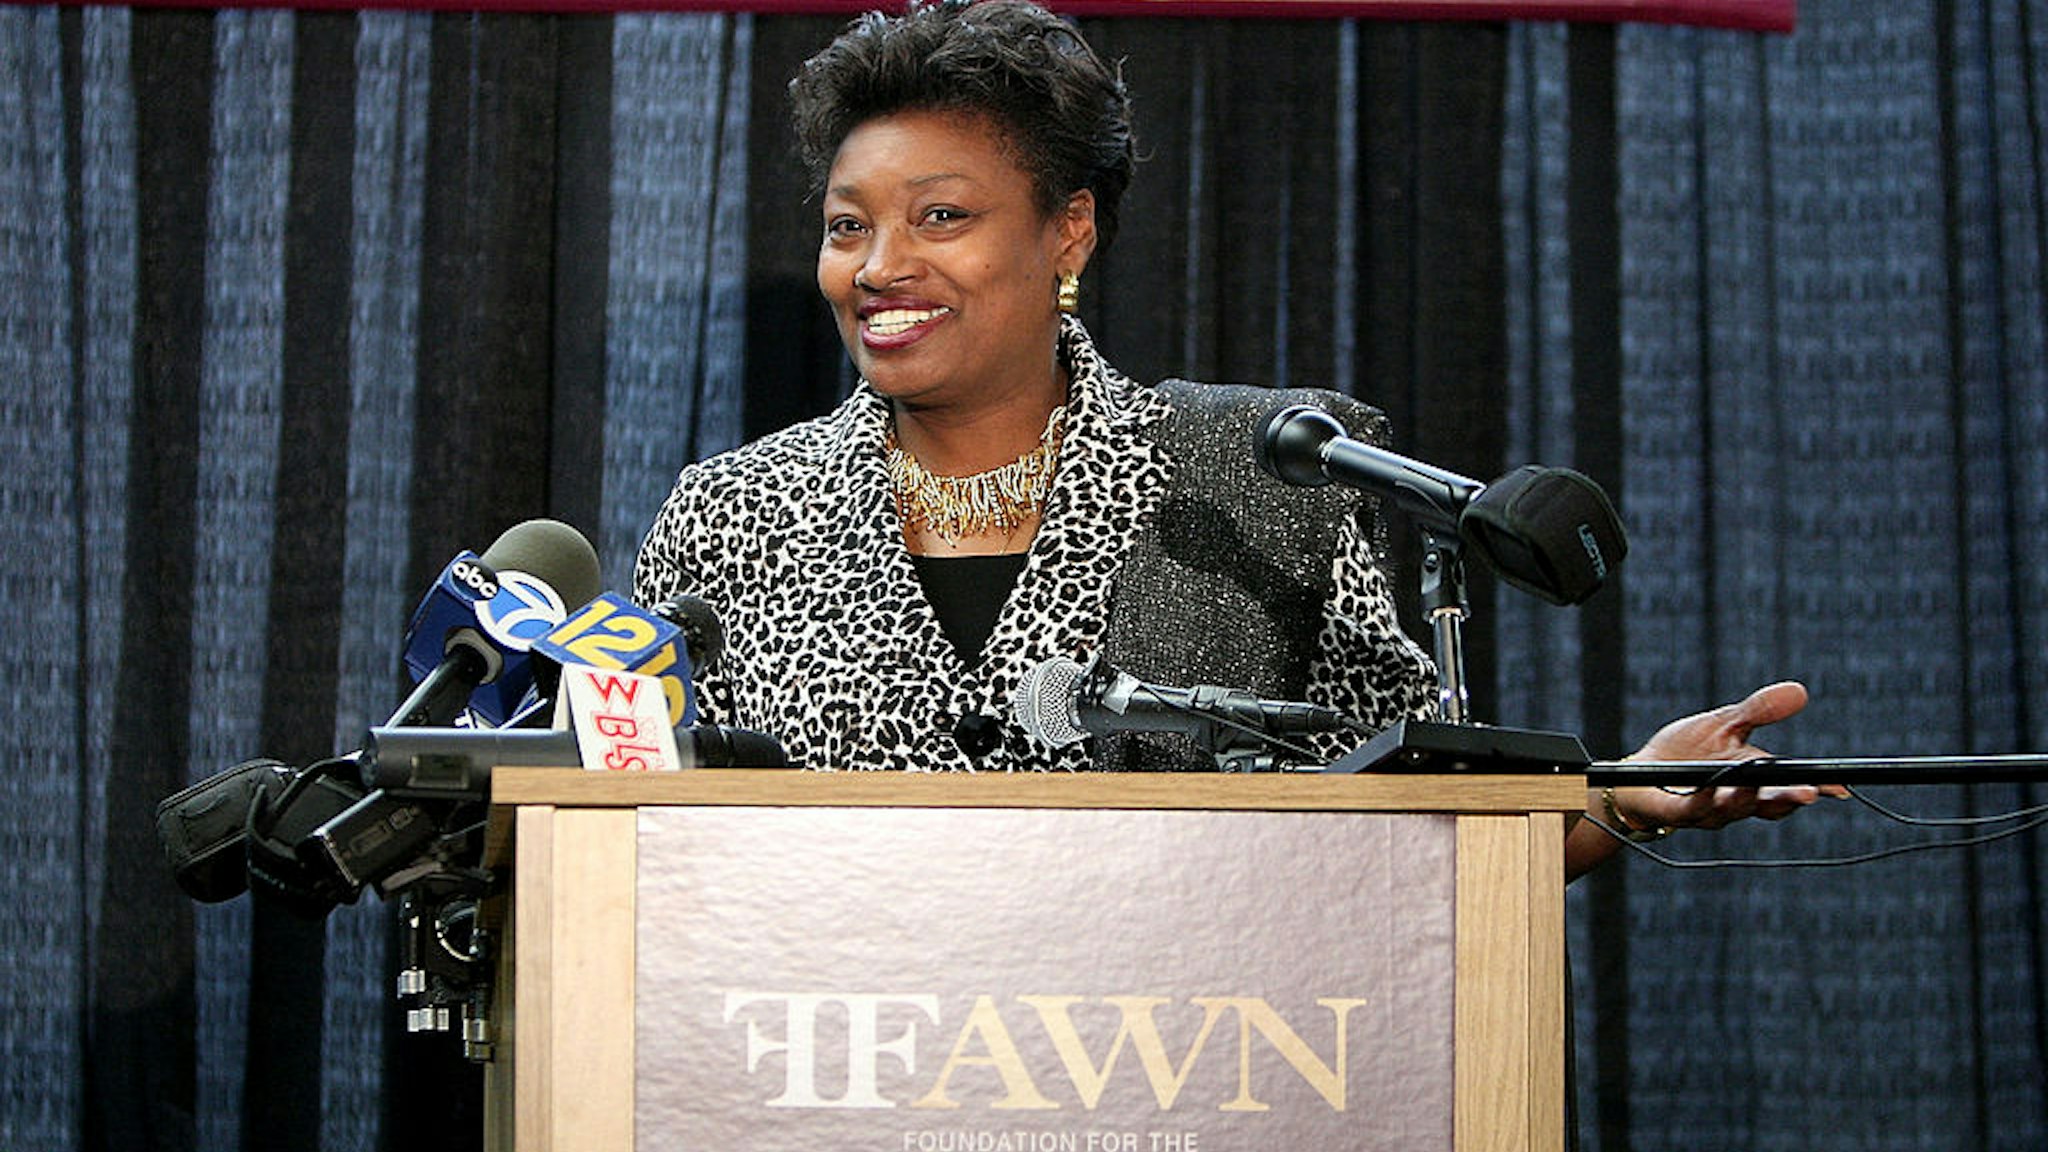 New York State Senator Andrea Stewart-Cousins address the press to announce Mary J. Blige's and Steve Stoute's new charity initiative, FFAWN, at Roosevalt High Scool in Yonkers, New York on May 9, 2008.